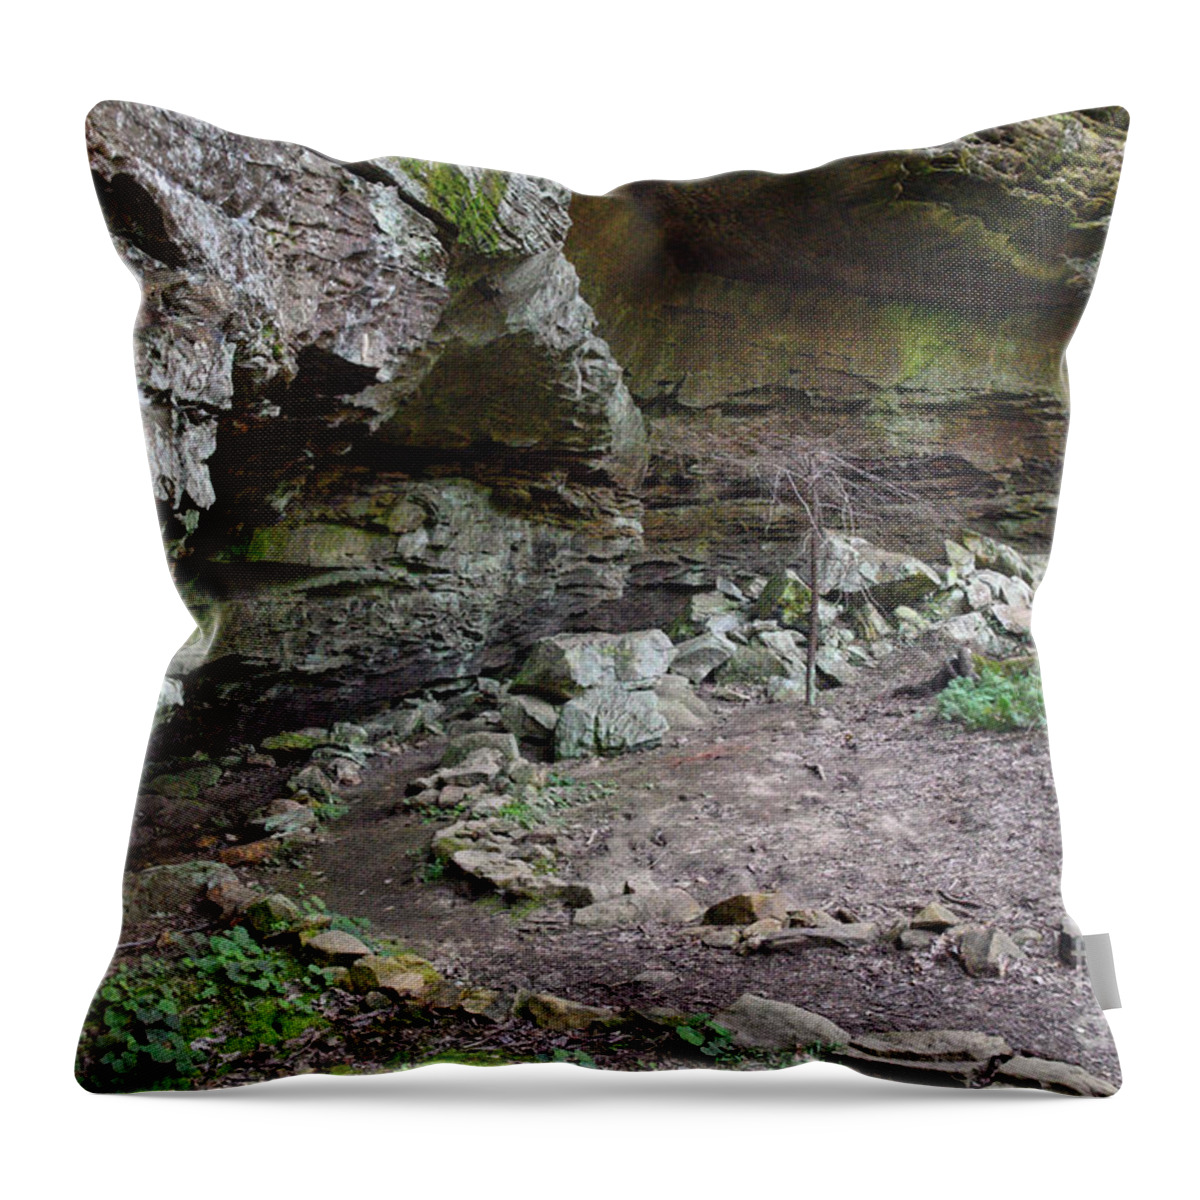 Pogue Creek Canyon Throw Pillow featuring the photograph Turkey Roost Rockhouse 1 by Phil Perkins